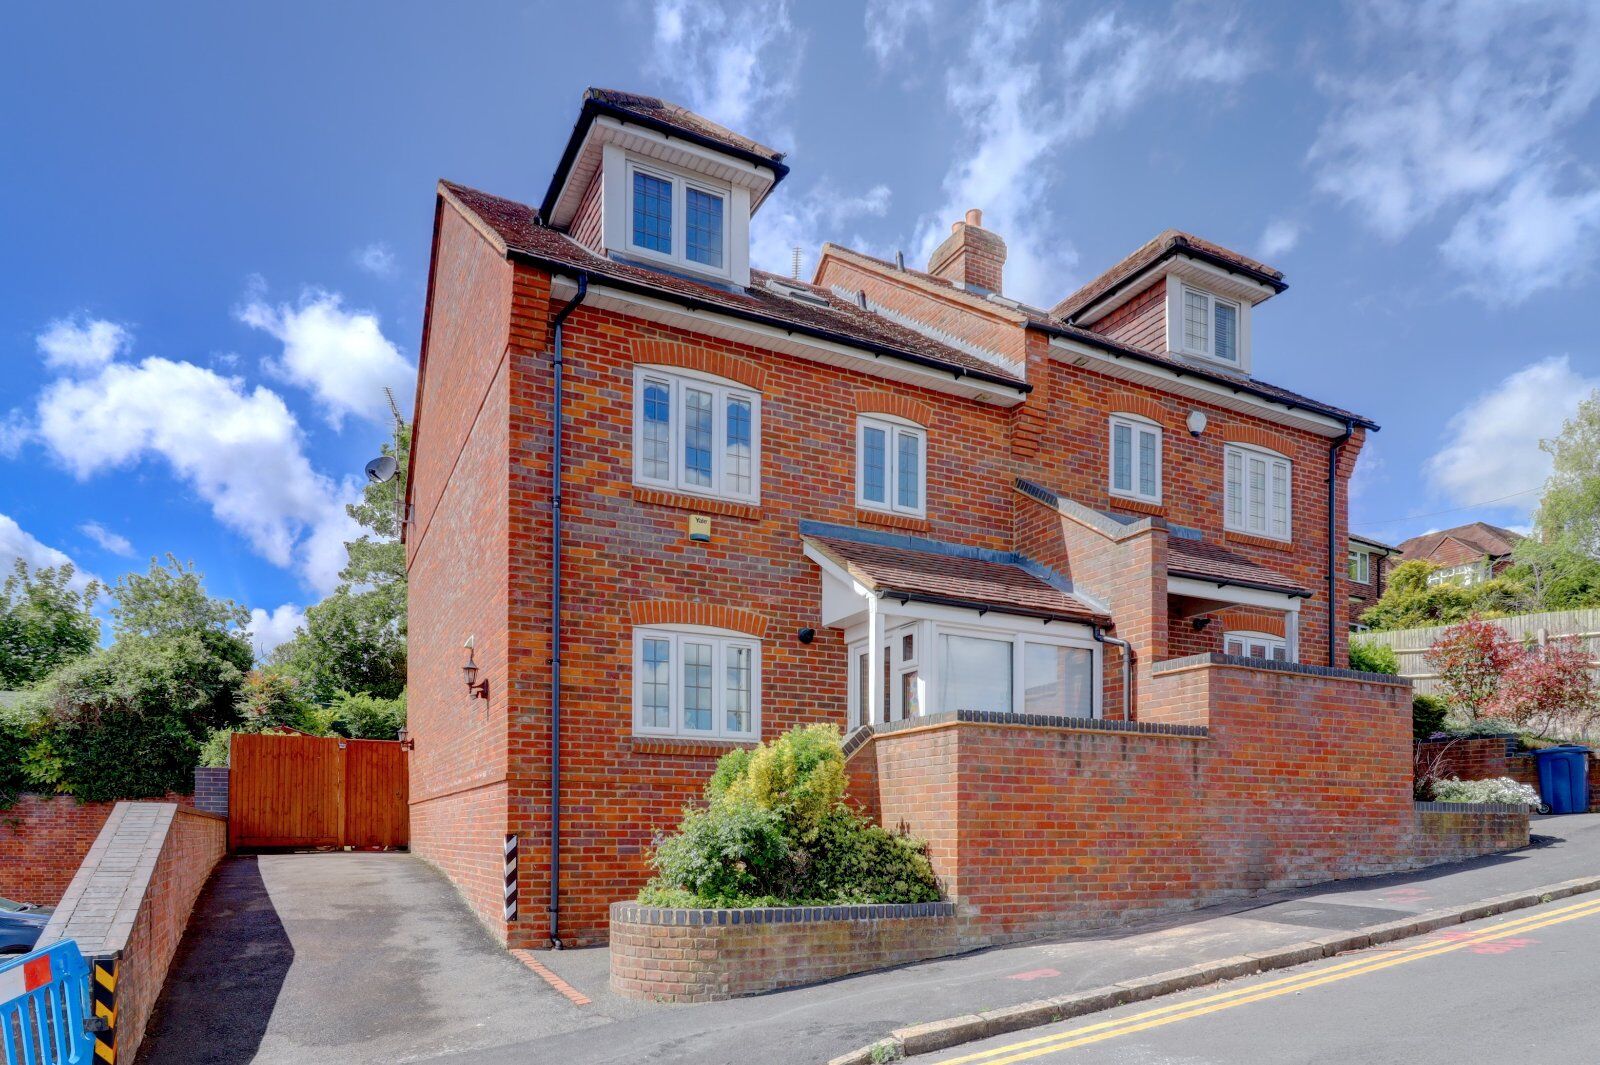 3 bedroom semi detached house for sale Lucas Road, High Wycombe, HP13, main image